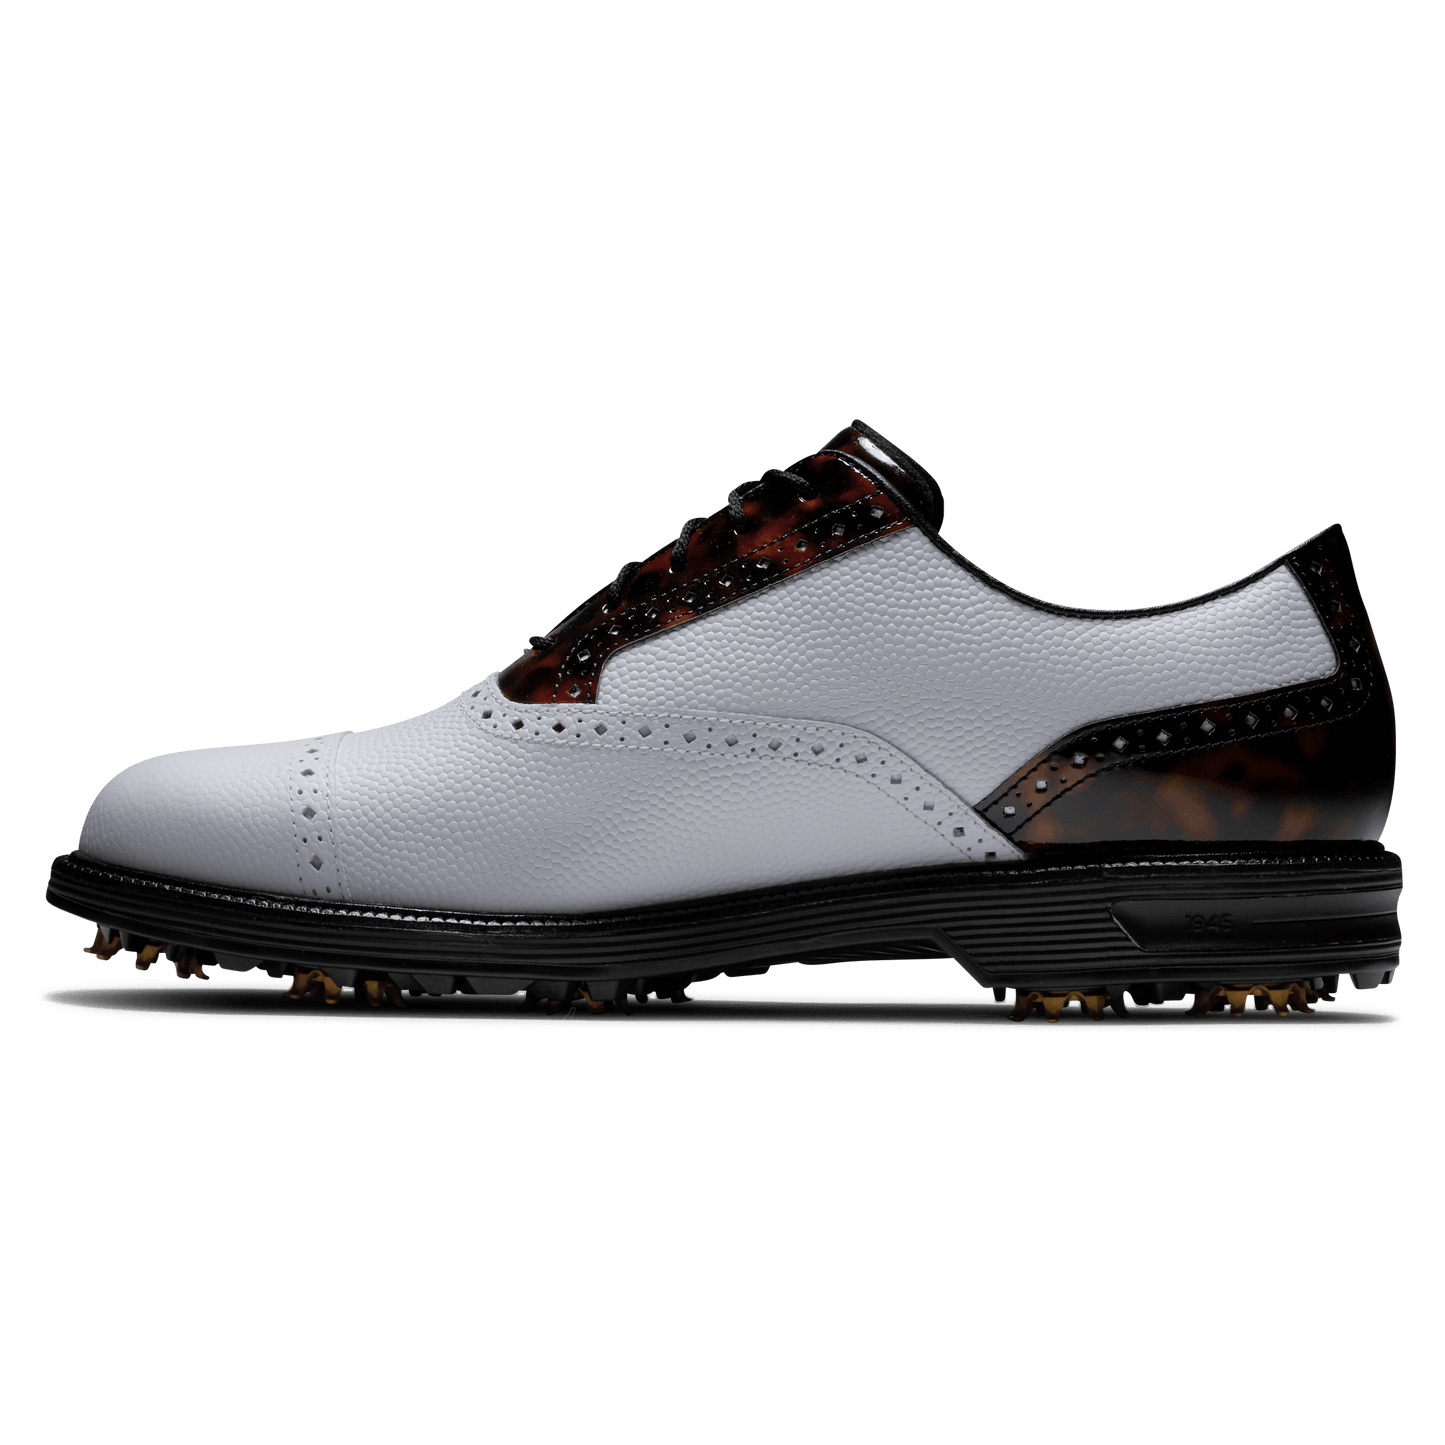 FOOTJOY PREMIERE SERIES GOLF SHOES - TORTOISE SHELL TARLOW (Limited Edition)